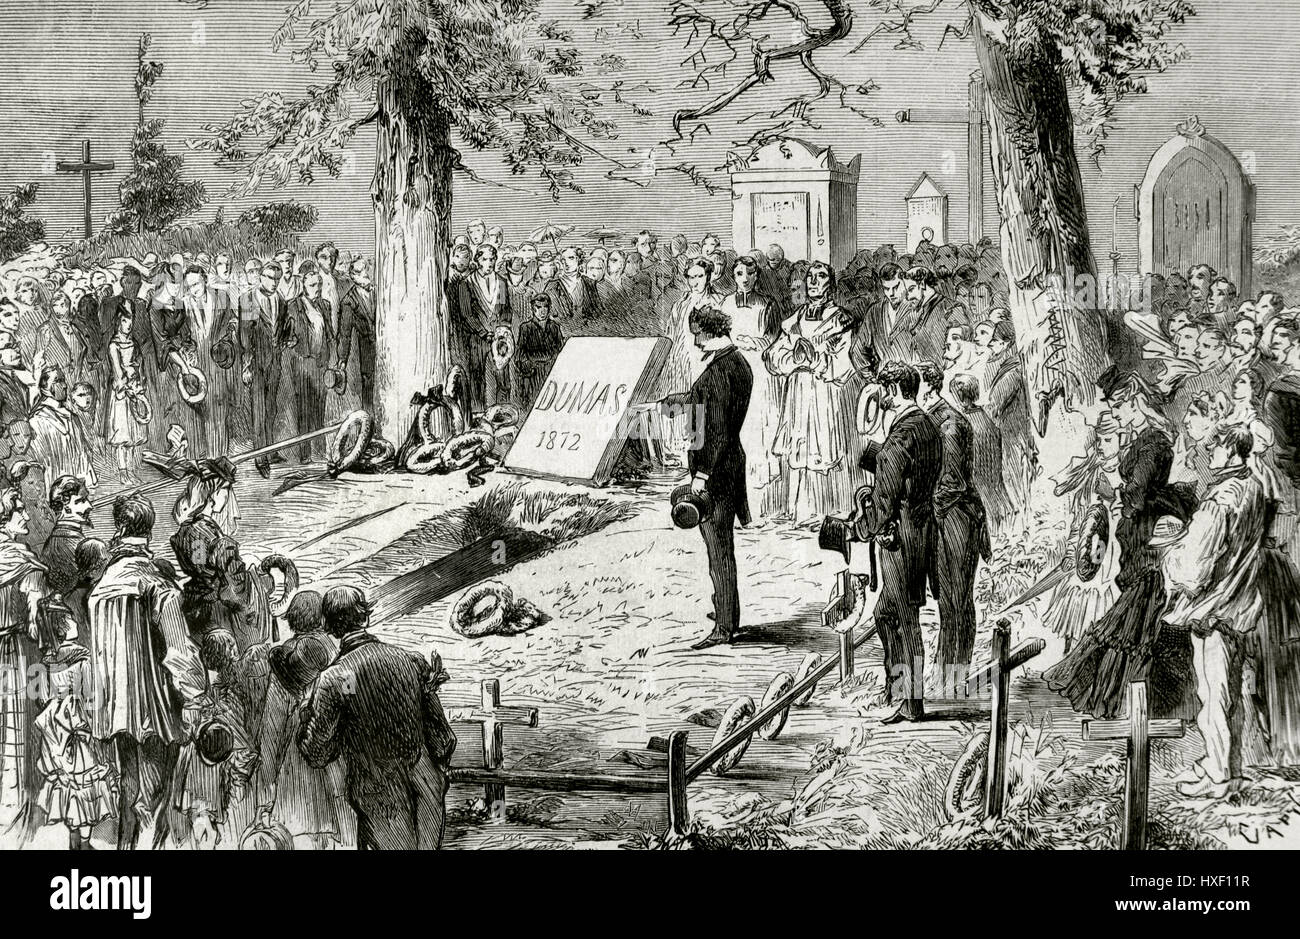 Alexandre Dumas (1802-1870). French writer. Burial at the cemetery of Villers-Cotterets. Engraving by Capuz. 'La Ilustración Española y Americana', 1872. Stock Photo